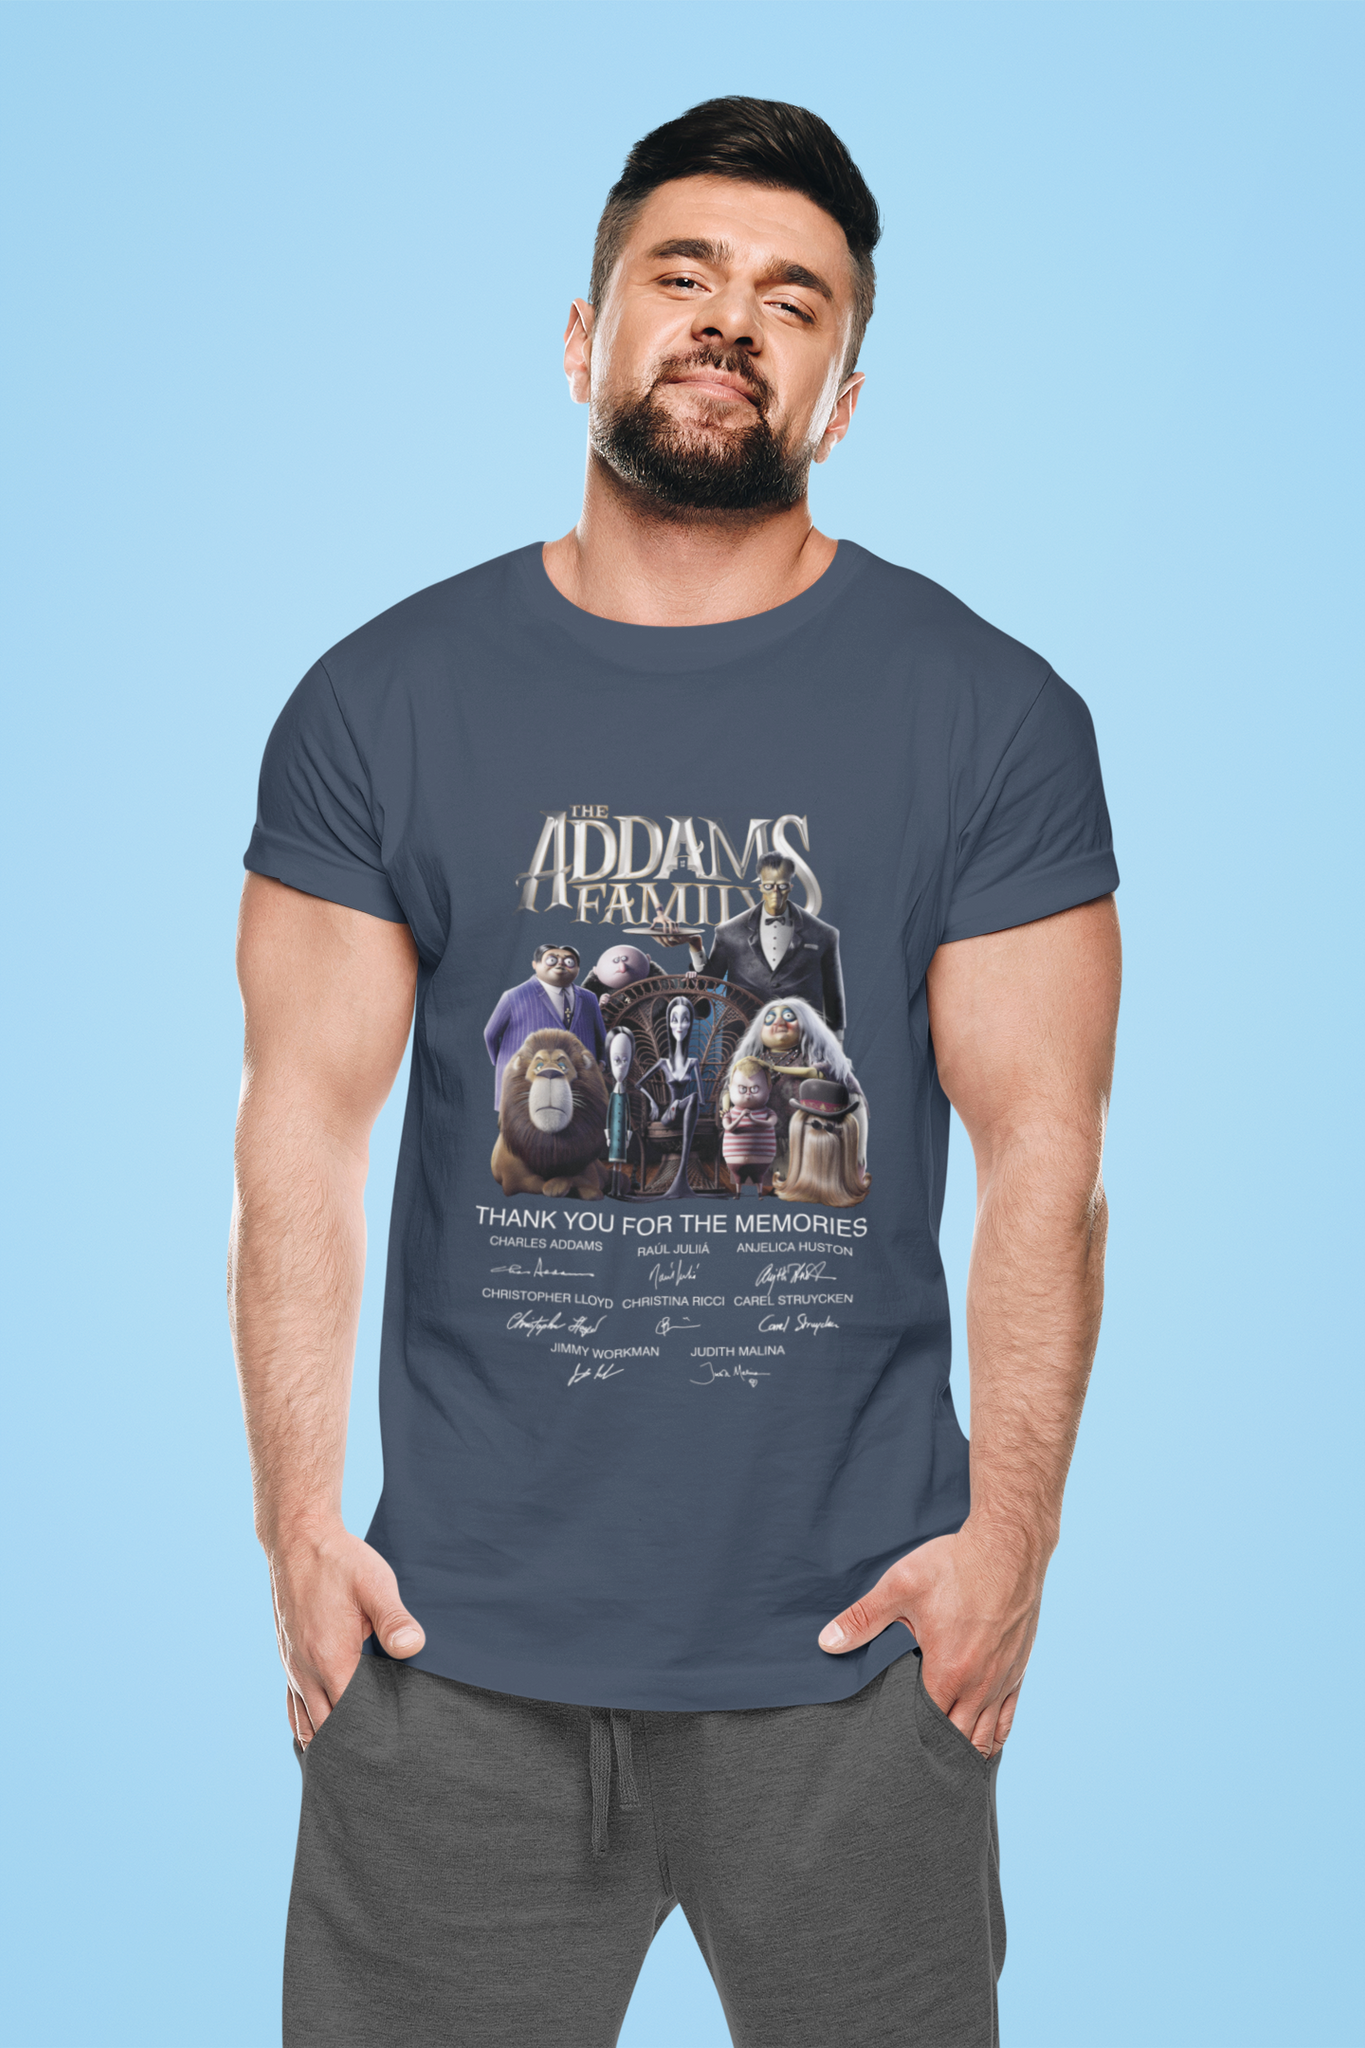 Addams Family T Shirt, Addams Family Characters Tshirt, Thank You For The Memories Shirt, Halloween Gifts